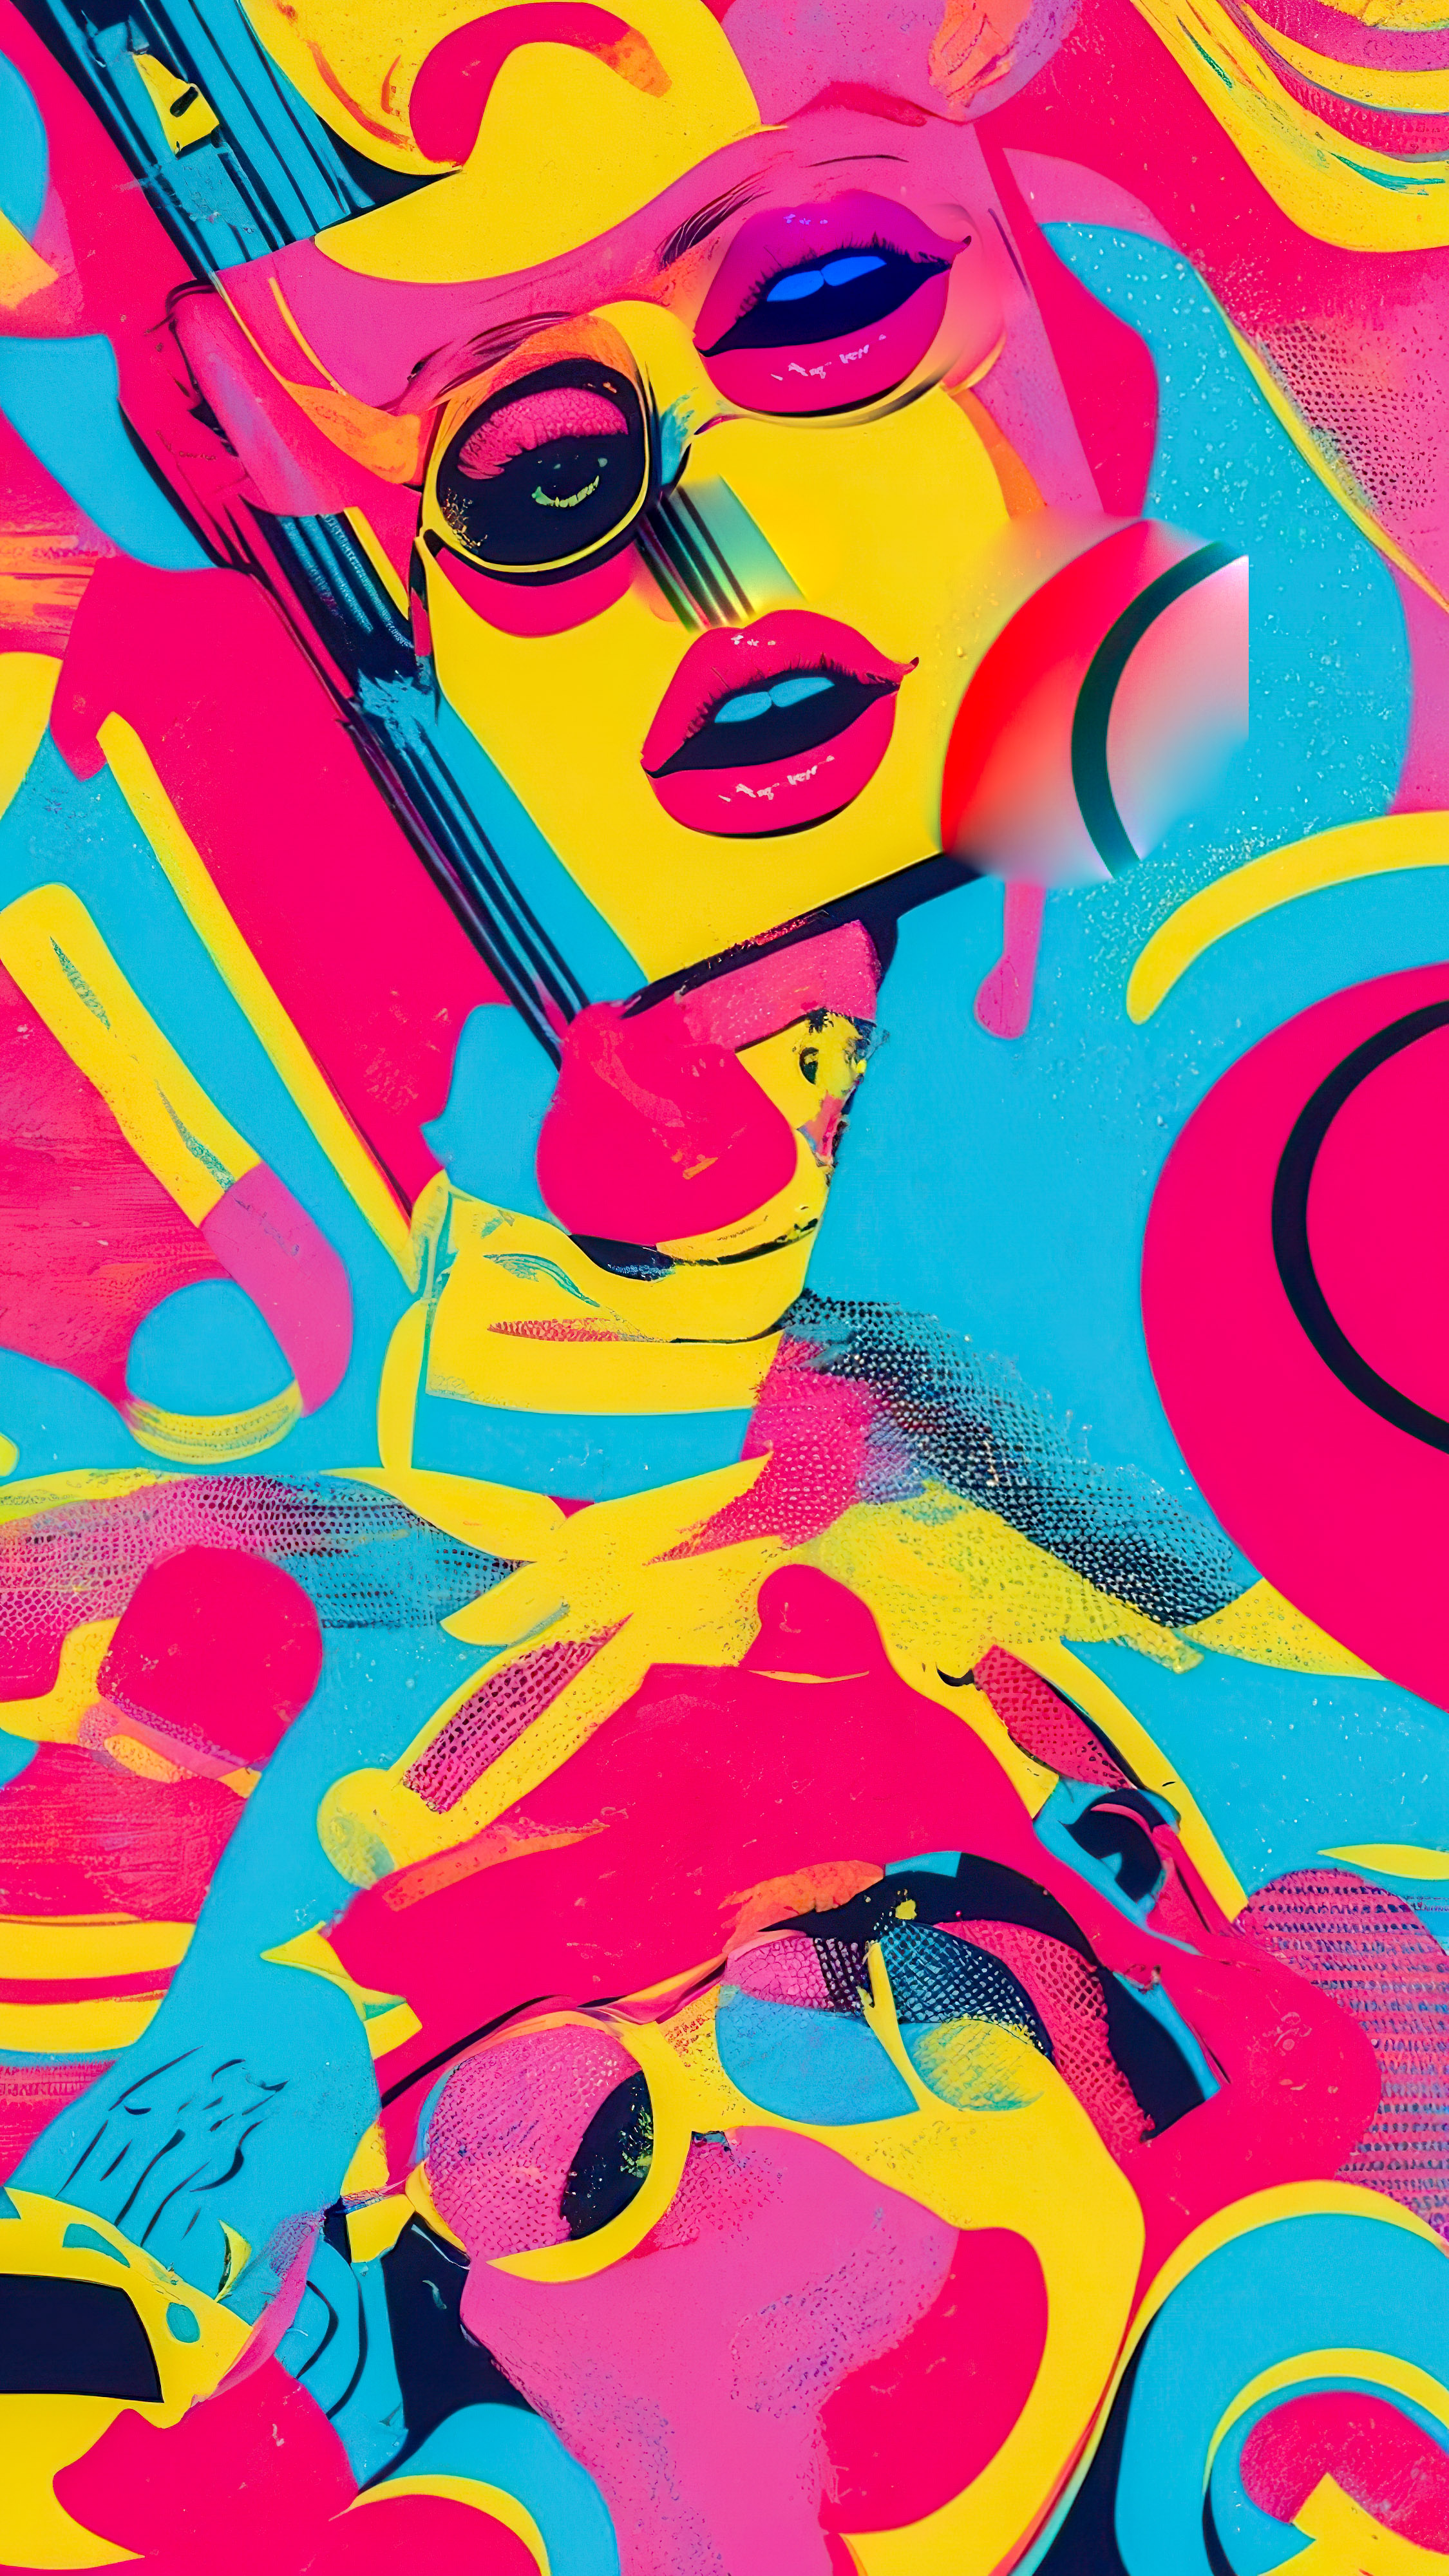 Transform your device’s appearance with our cool iPhone backgrounds, featuring a bold, colorful pop art design with iconic imagery and vibrant colors.